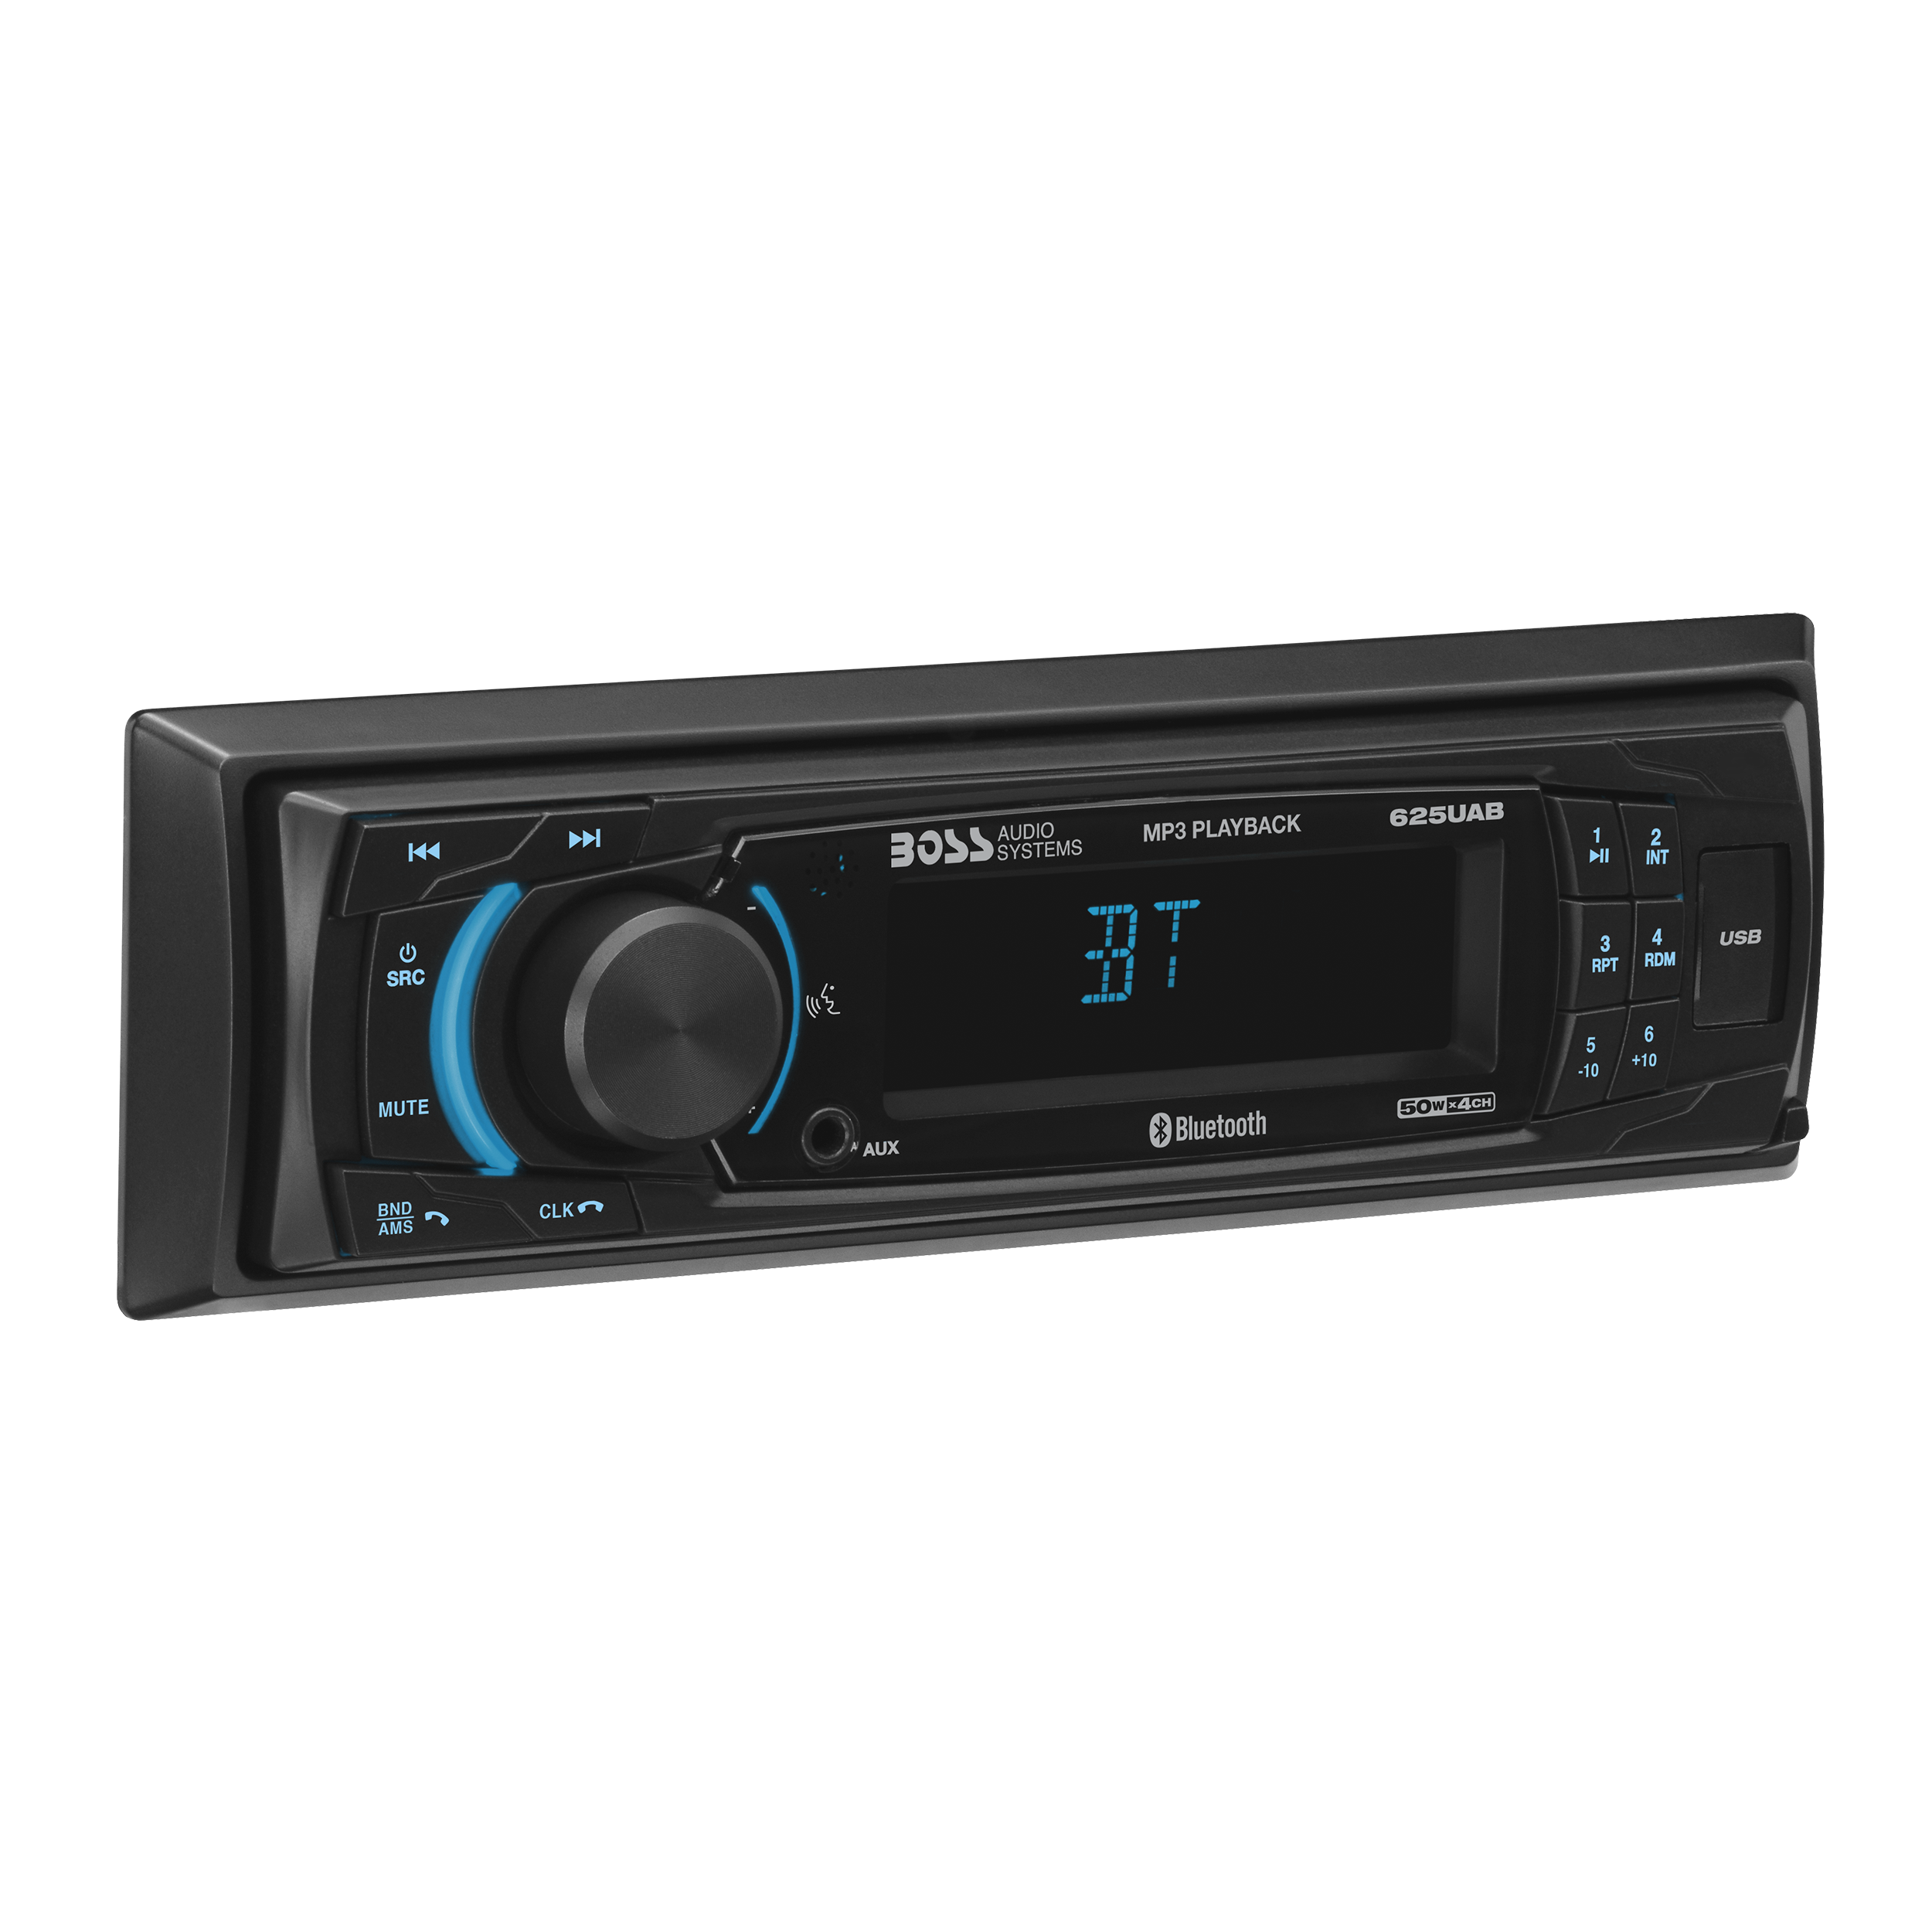 BOSS Audio Systems 625UAB Car Stereo, Bluetooth, No DVD, USB, AUX In AM/FM Radio - image 1 of 14